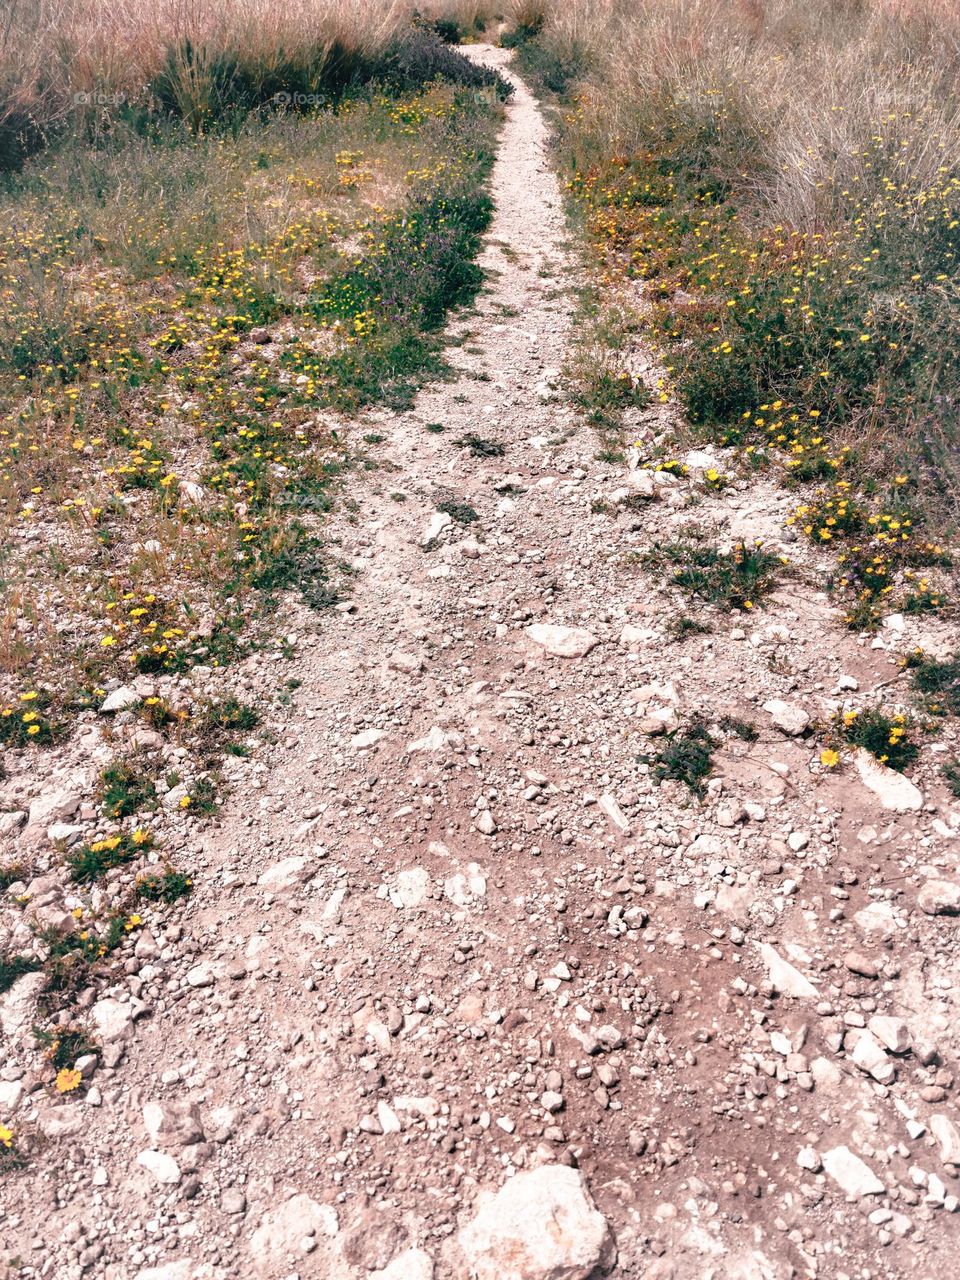 Path with stones and wildflowers